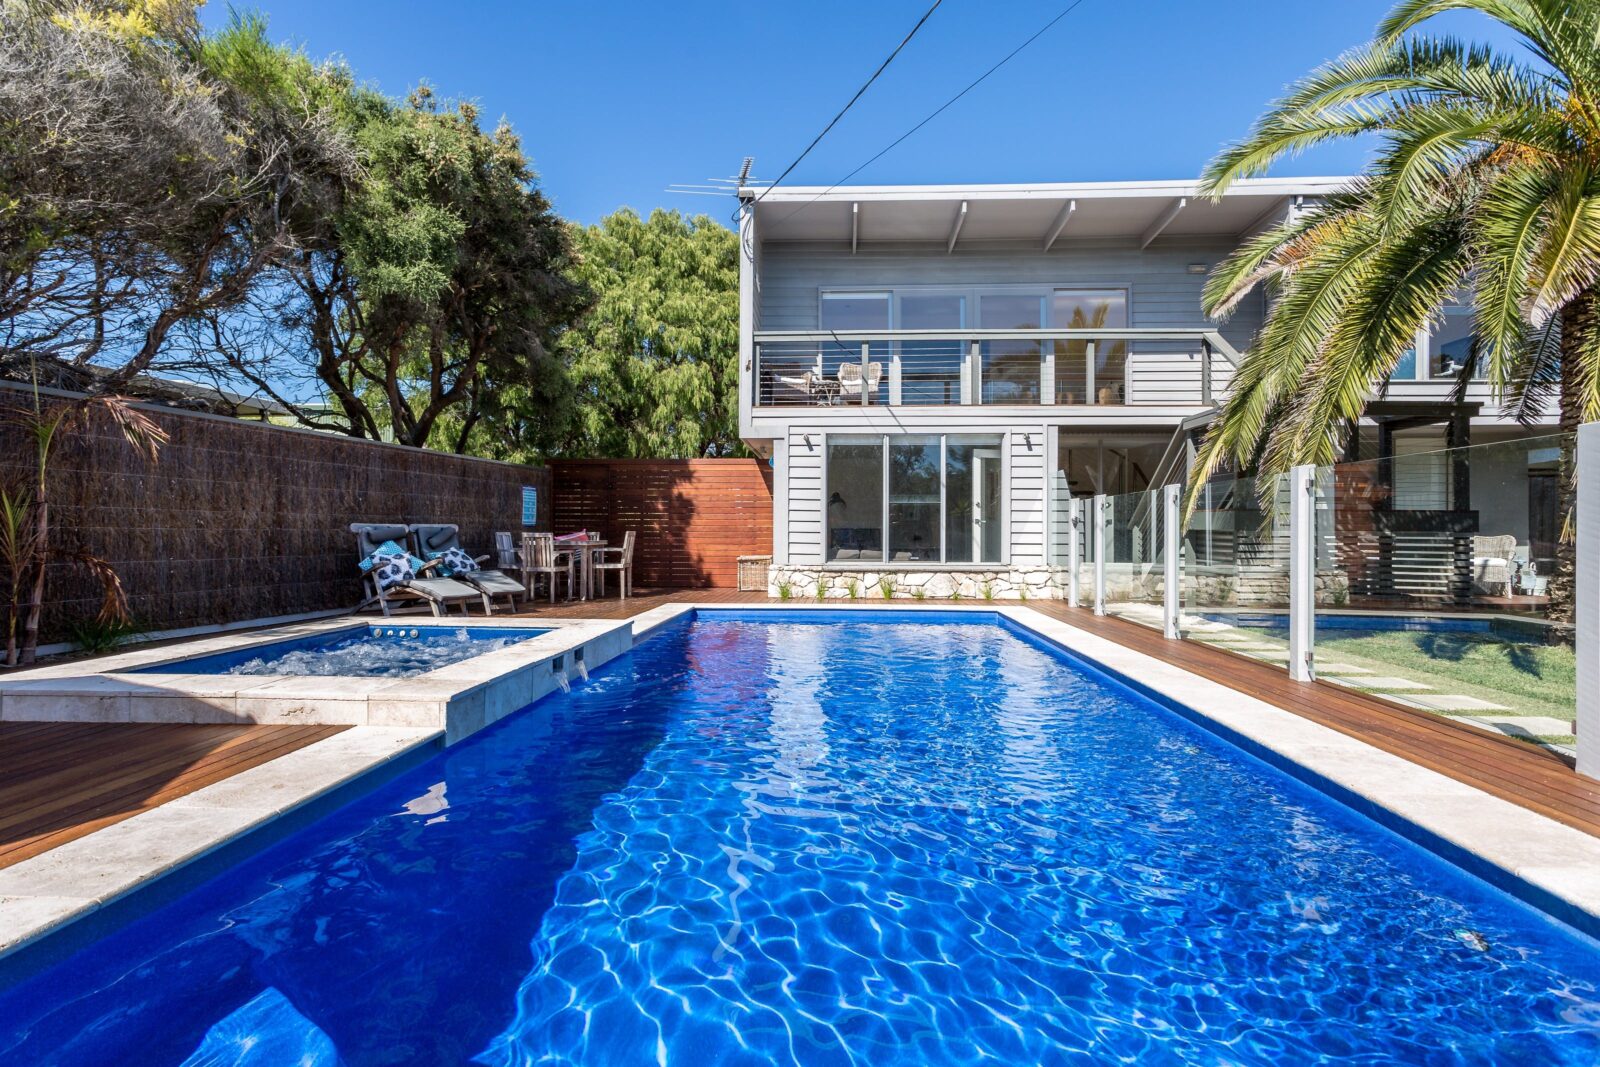 Front Beach House, large family home with pool and spa. Close to Blairgowrie village and beach